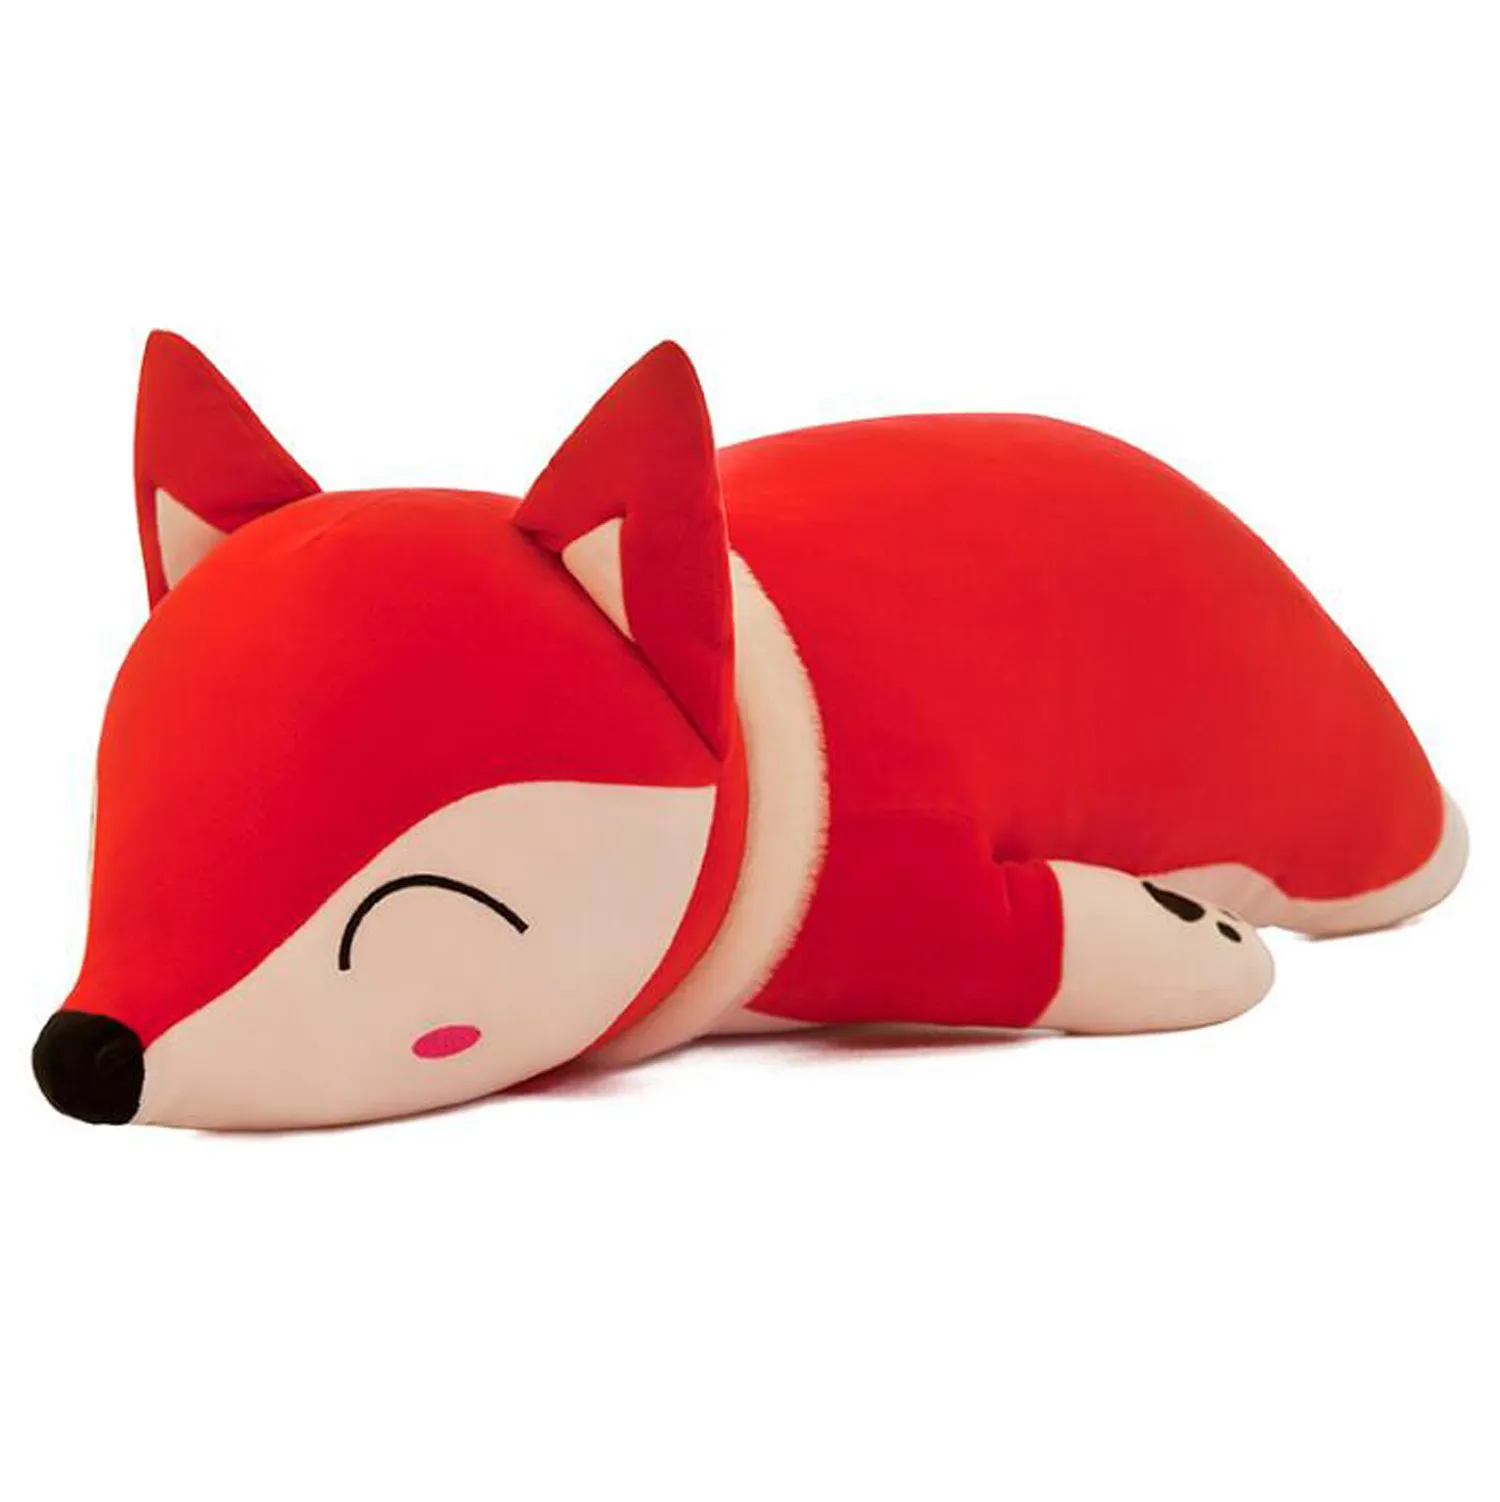 Mother & Baby Fox Plush Set | Super Soft Fox Stuffed Animal Toys for Toddlers 1-3 | Cute Plushies for Kids’ Bedroom | 18-in Stuffed Animals for